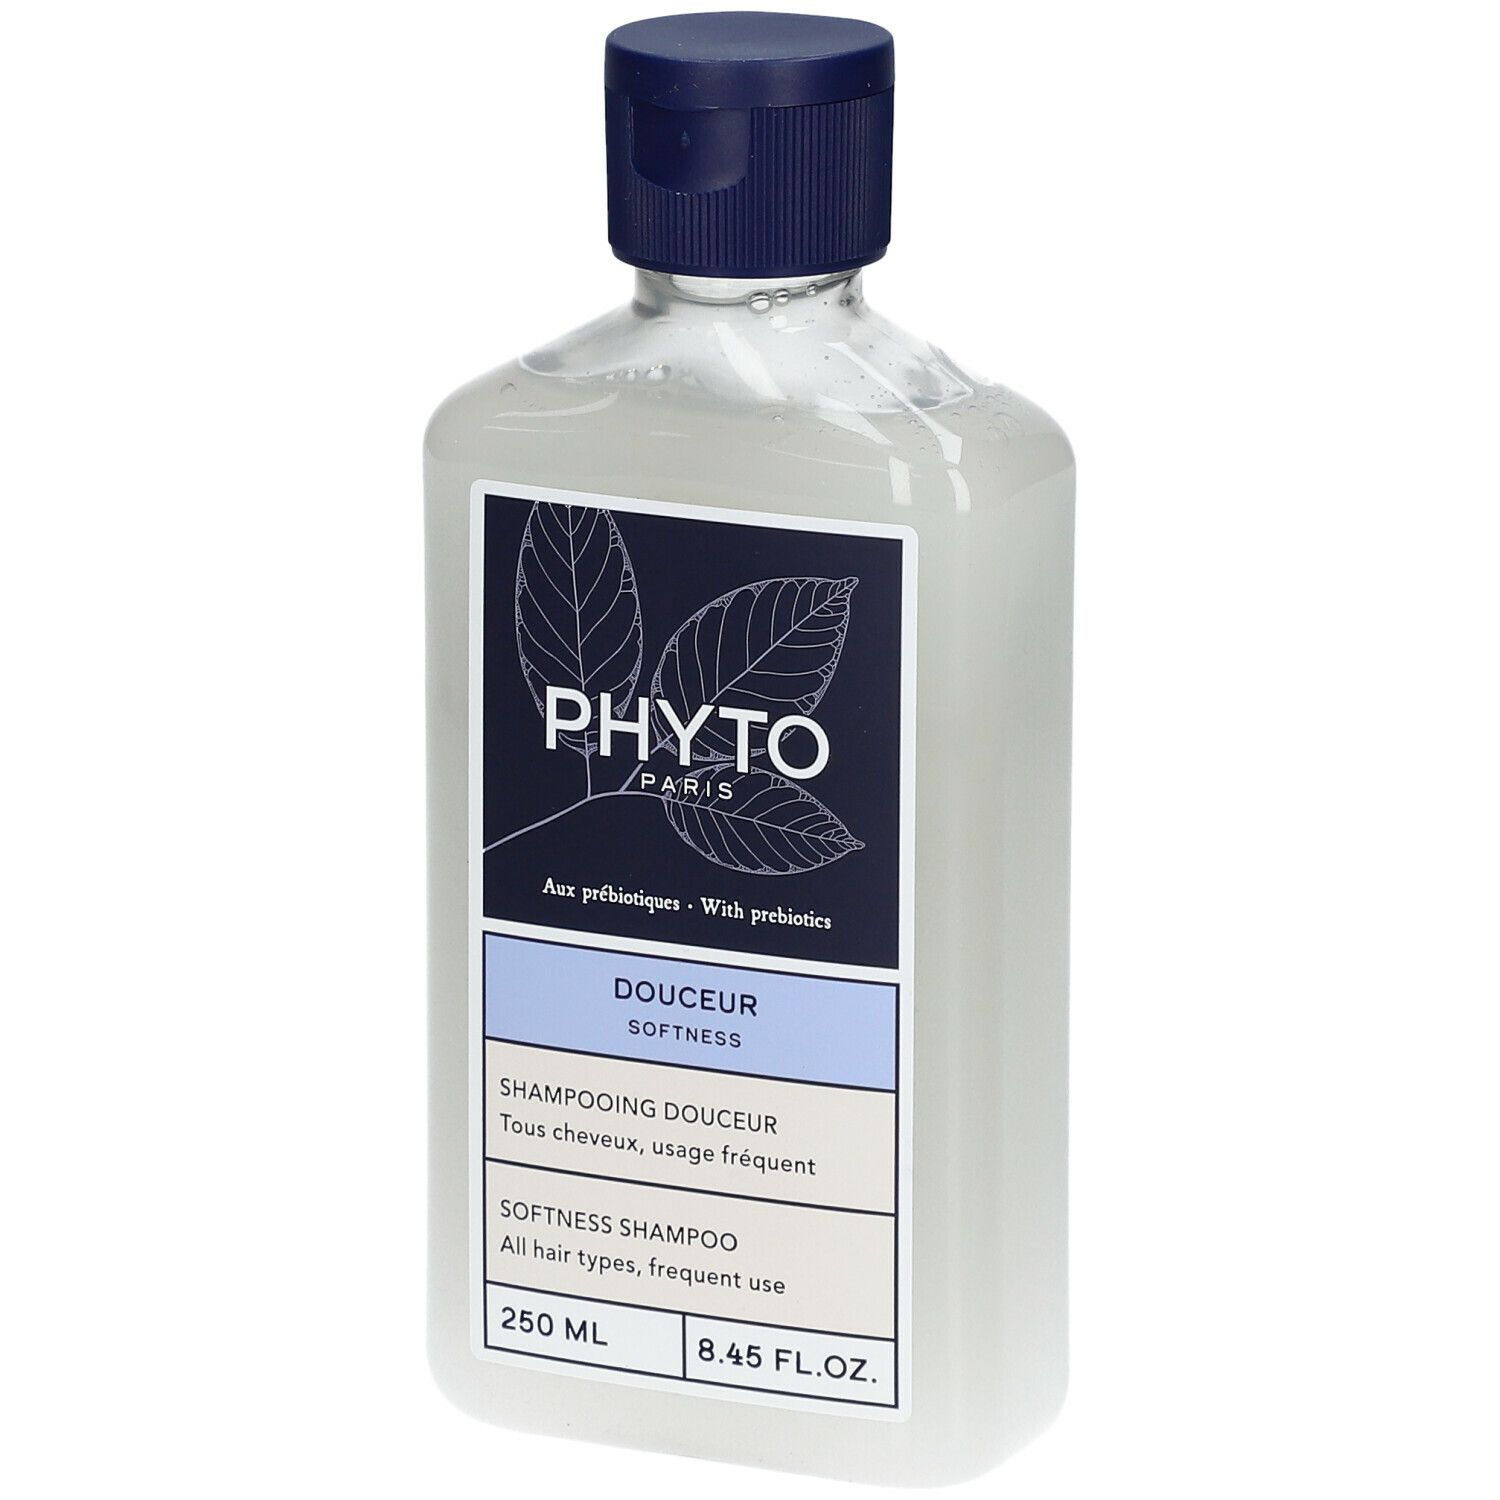 Phyto Douceur Shampooing Douceur 250 ml shampoing